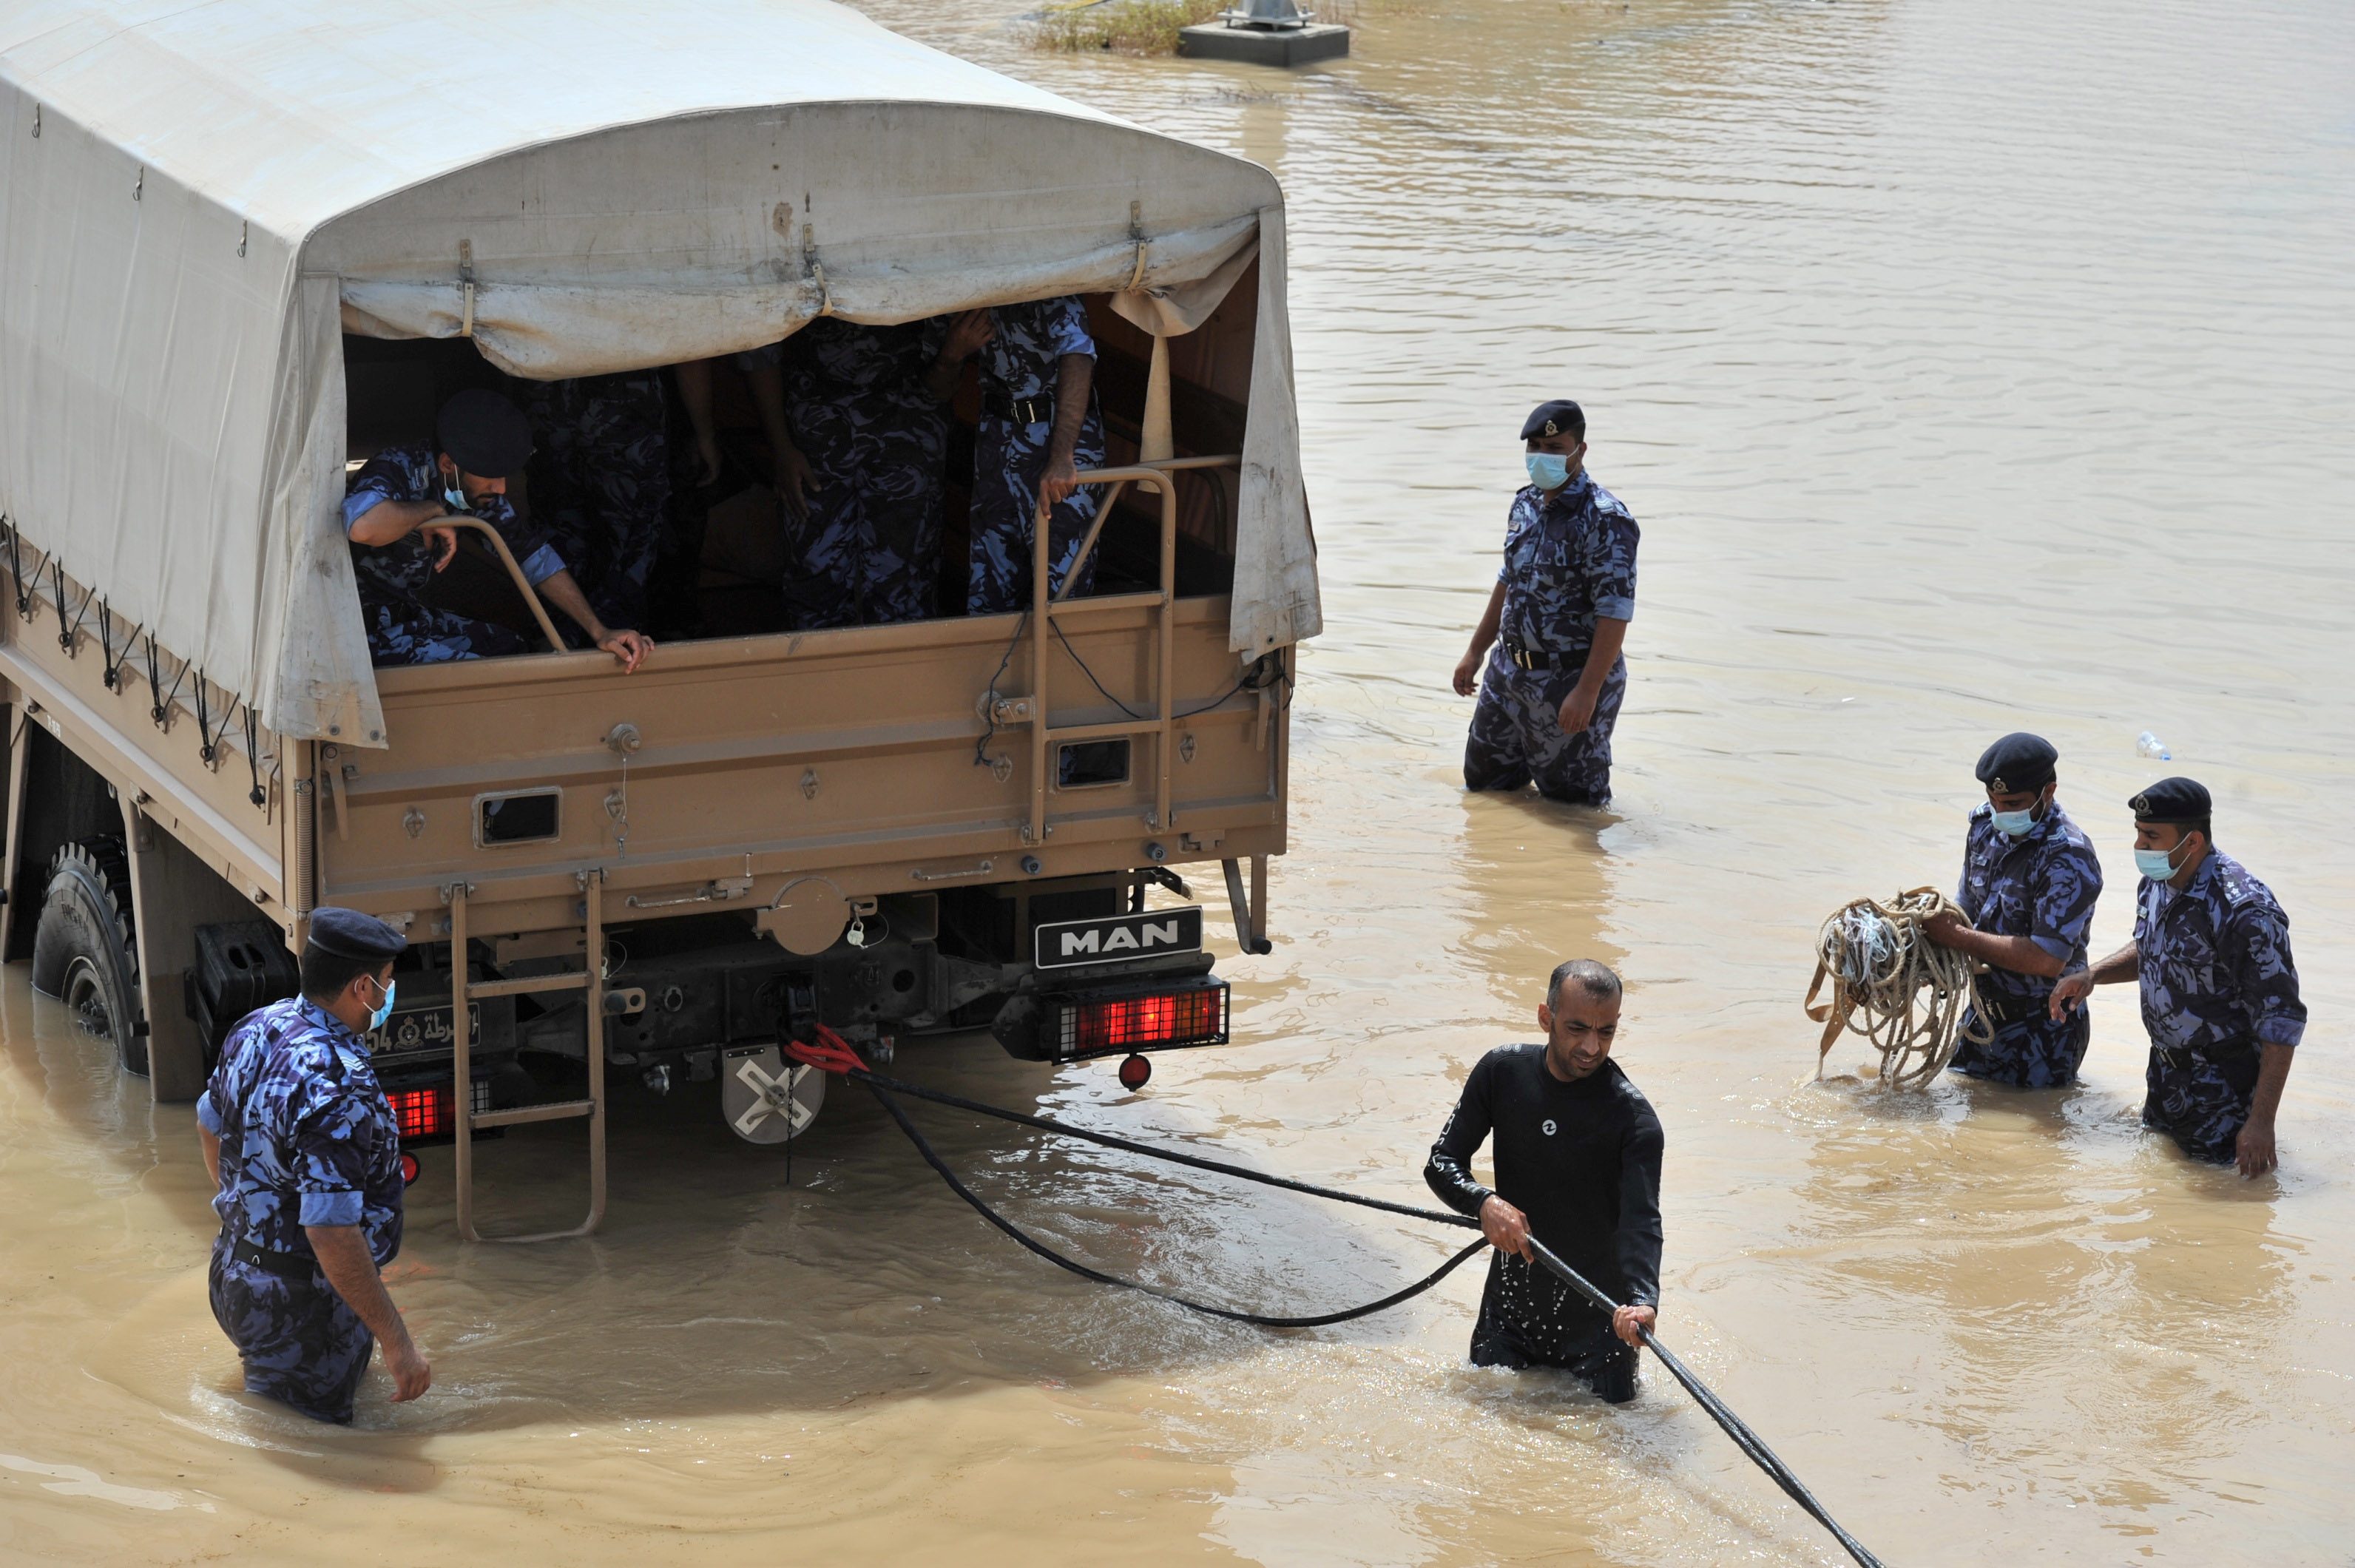 Oman Military officials repair damages caused by Cyclone Shaheen in Al Musanaa